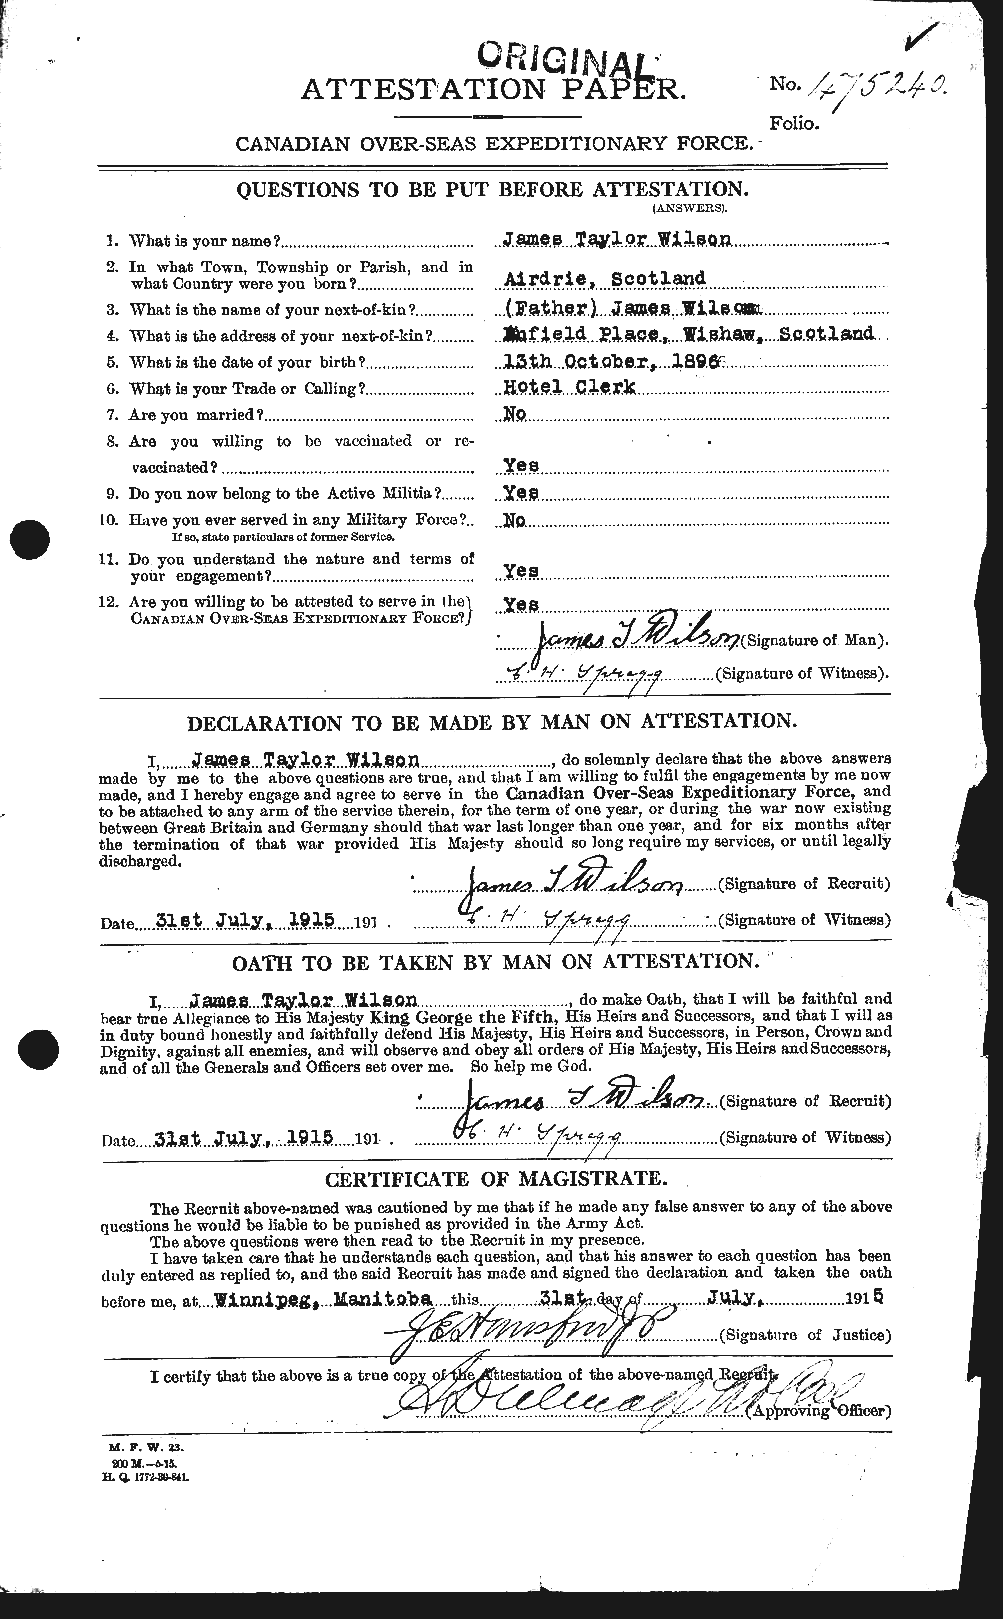 Personnel Records of the First World War - CEF 681500a